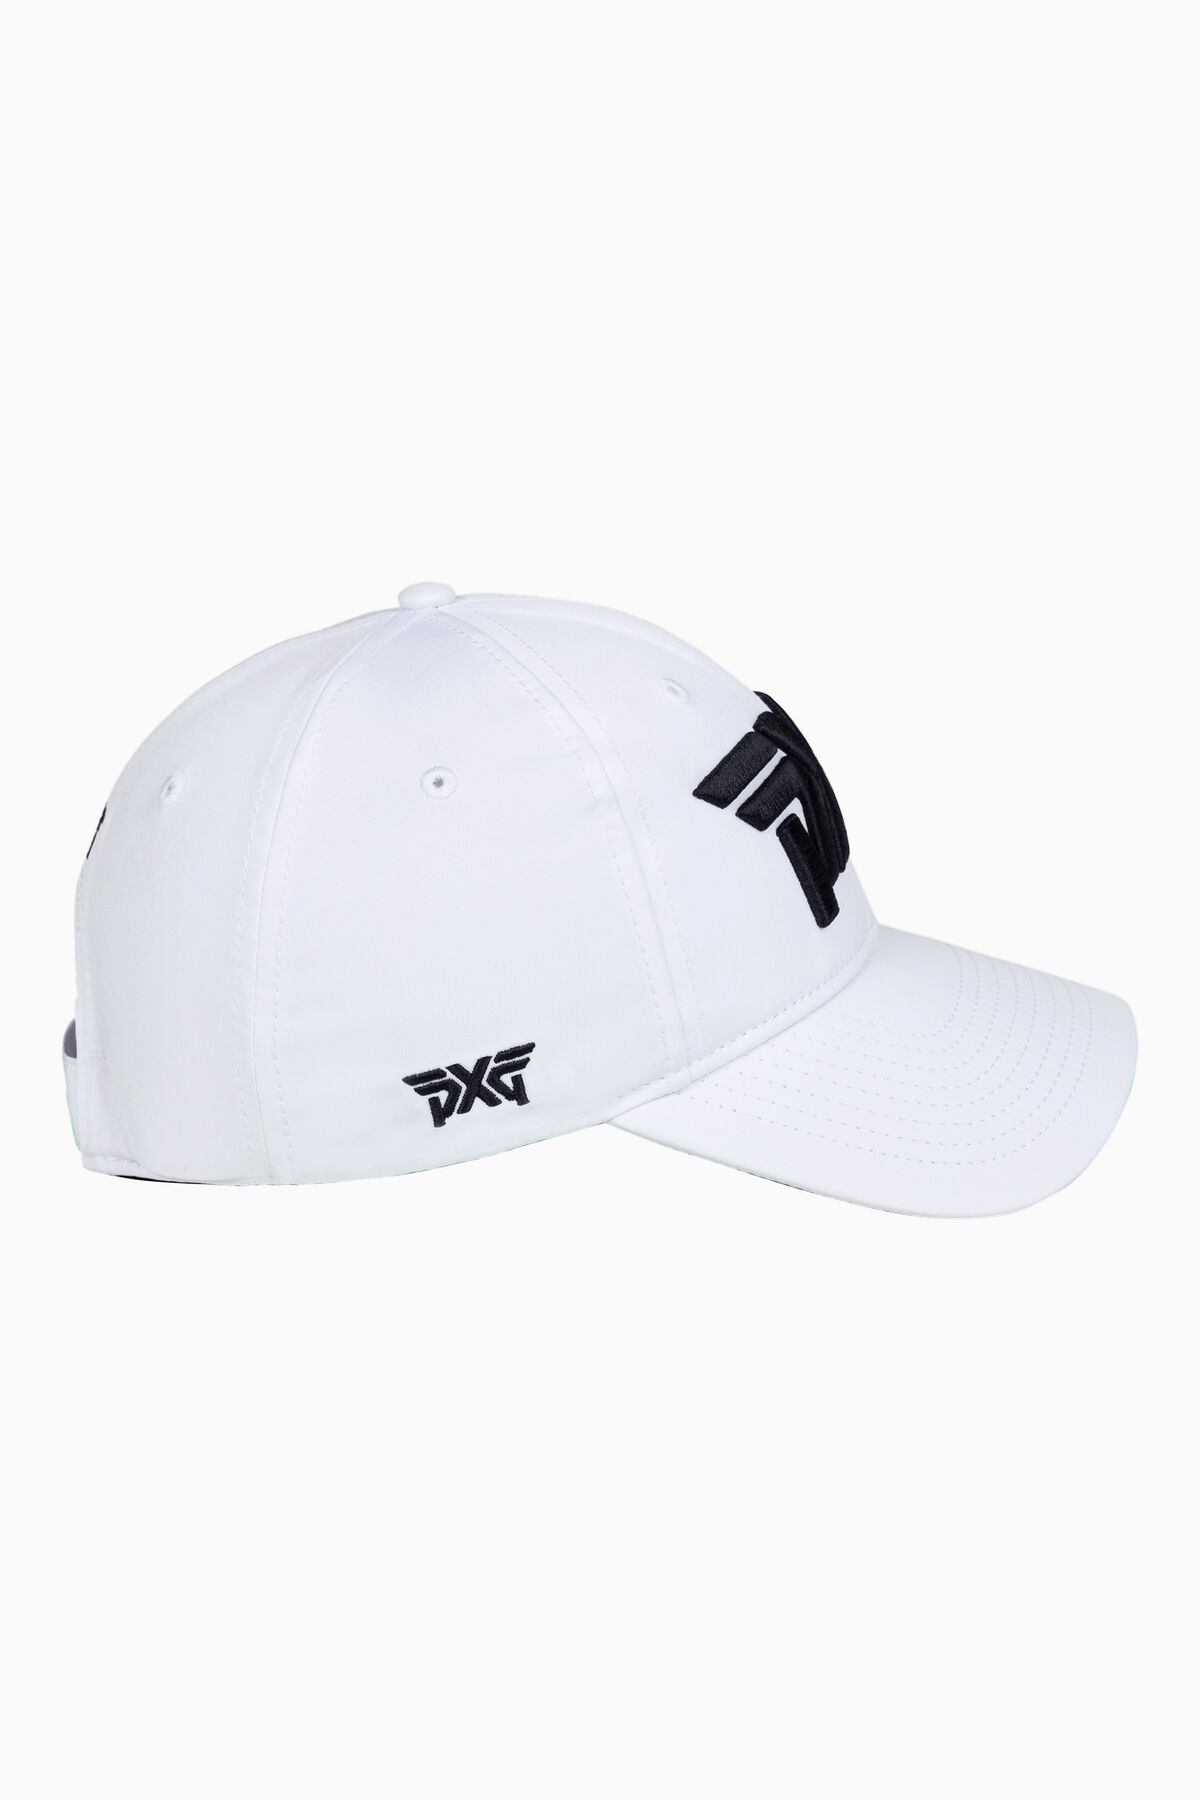 Women's Unstructured Low Crown Cap White